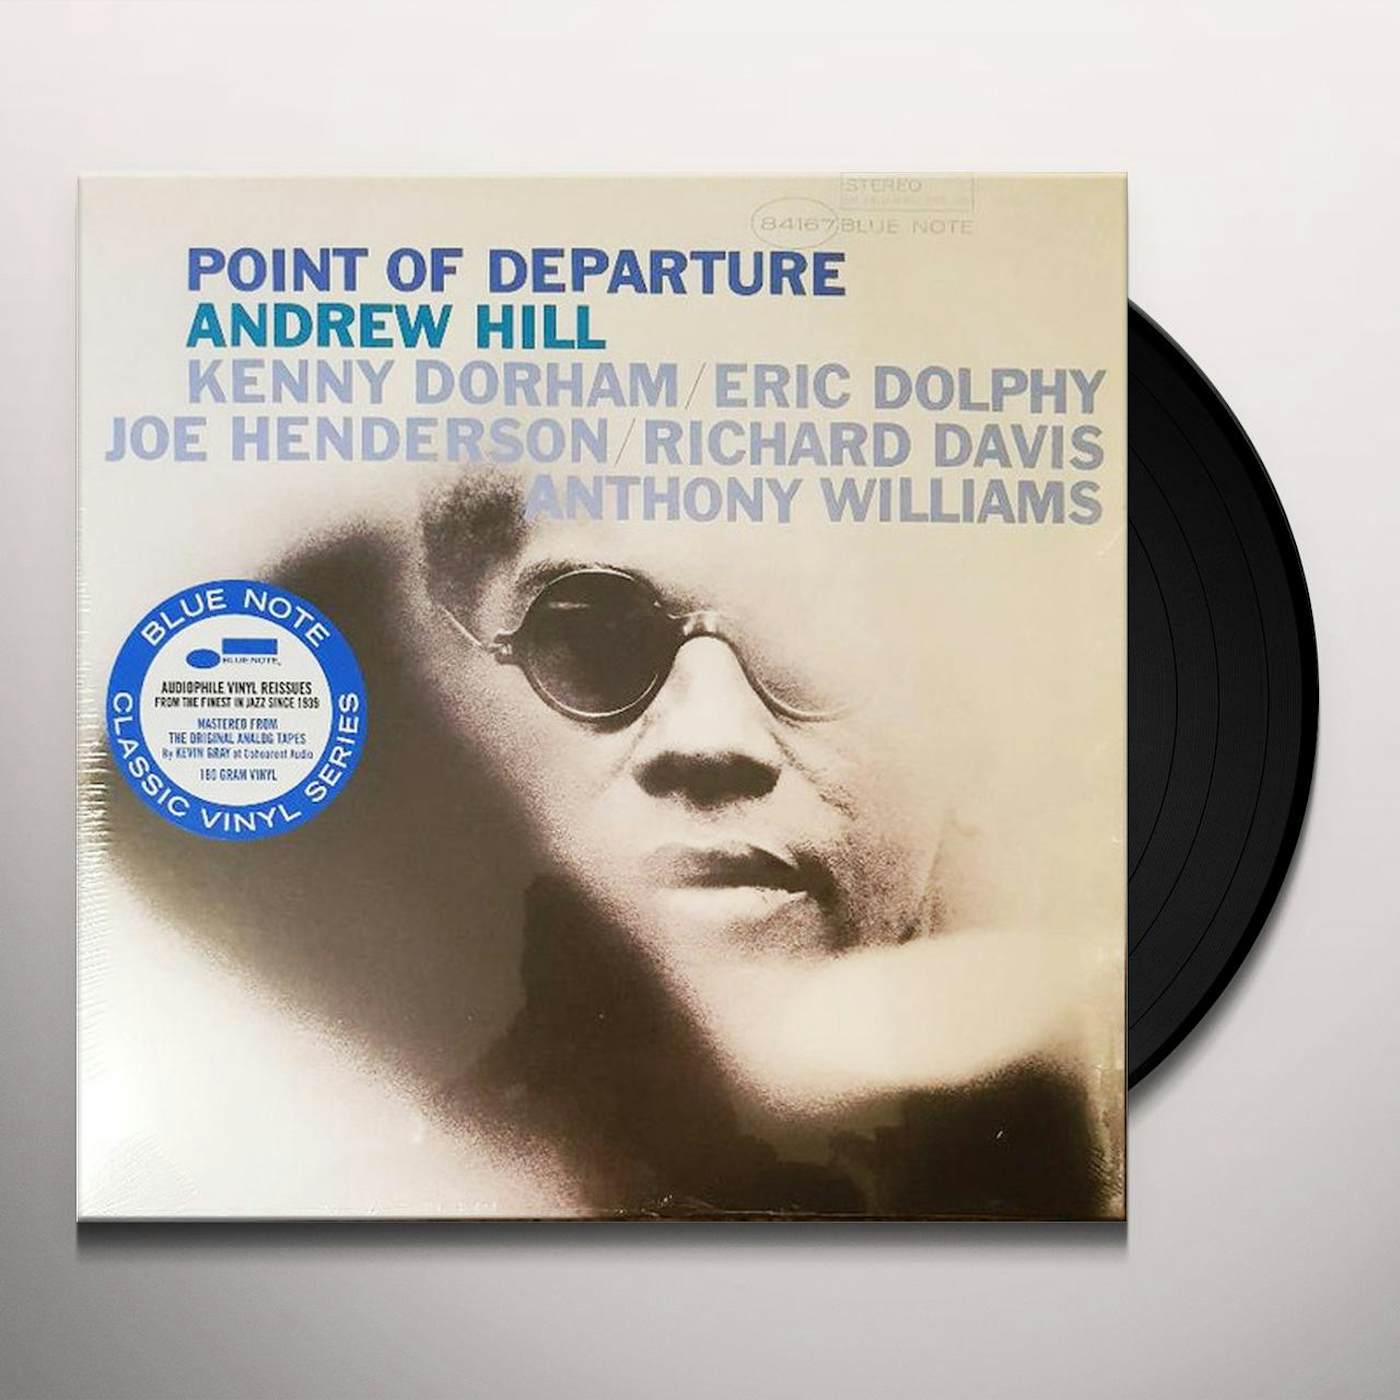 Andrew Hill POINT OF DEPARTURE (BLUE NOTE CLASSIC VINYL SERIES) Vinyl Record